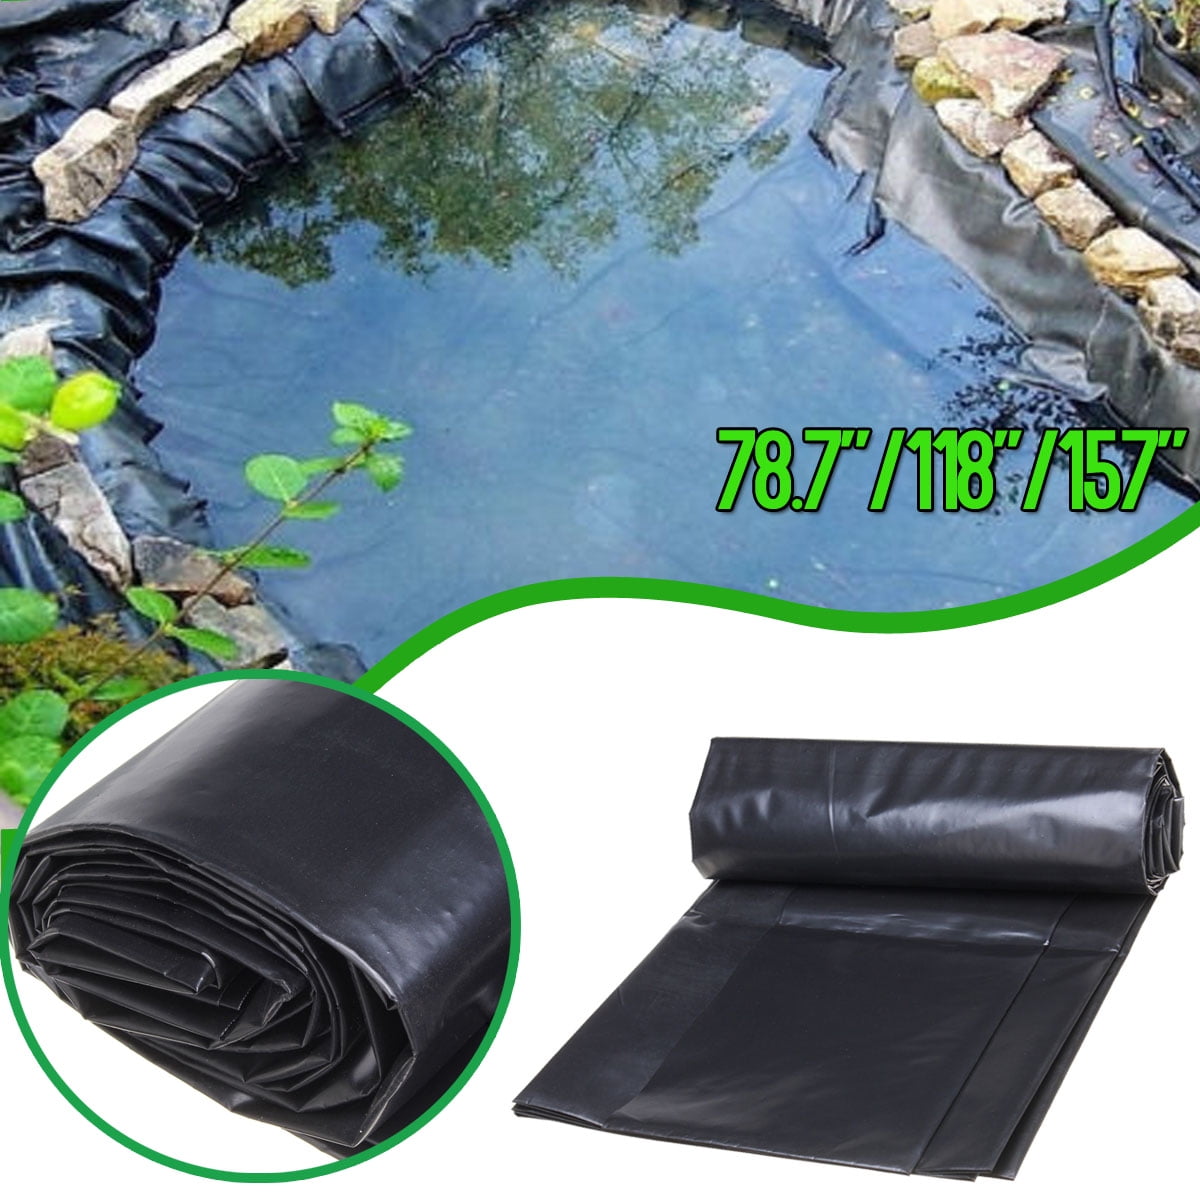 HDPE Pond Liners Gardens Pools PVC Pond Liners Membrane Safe and Long-lasting 